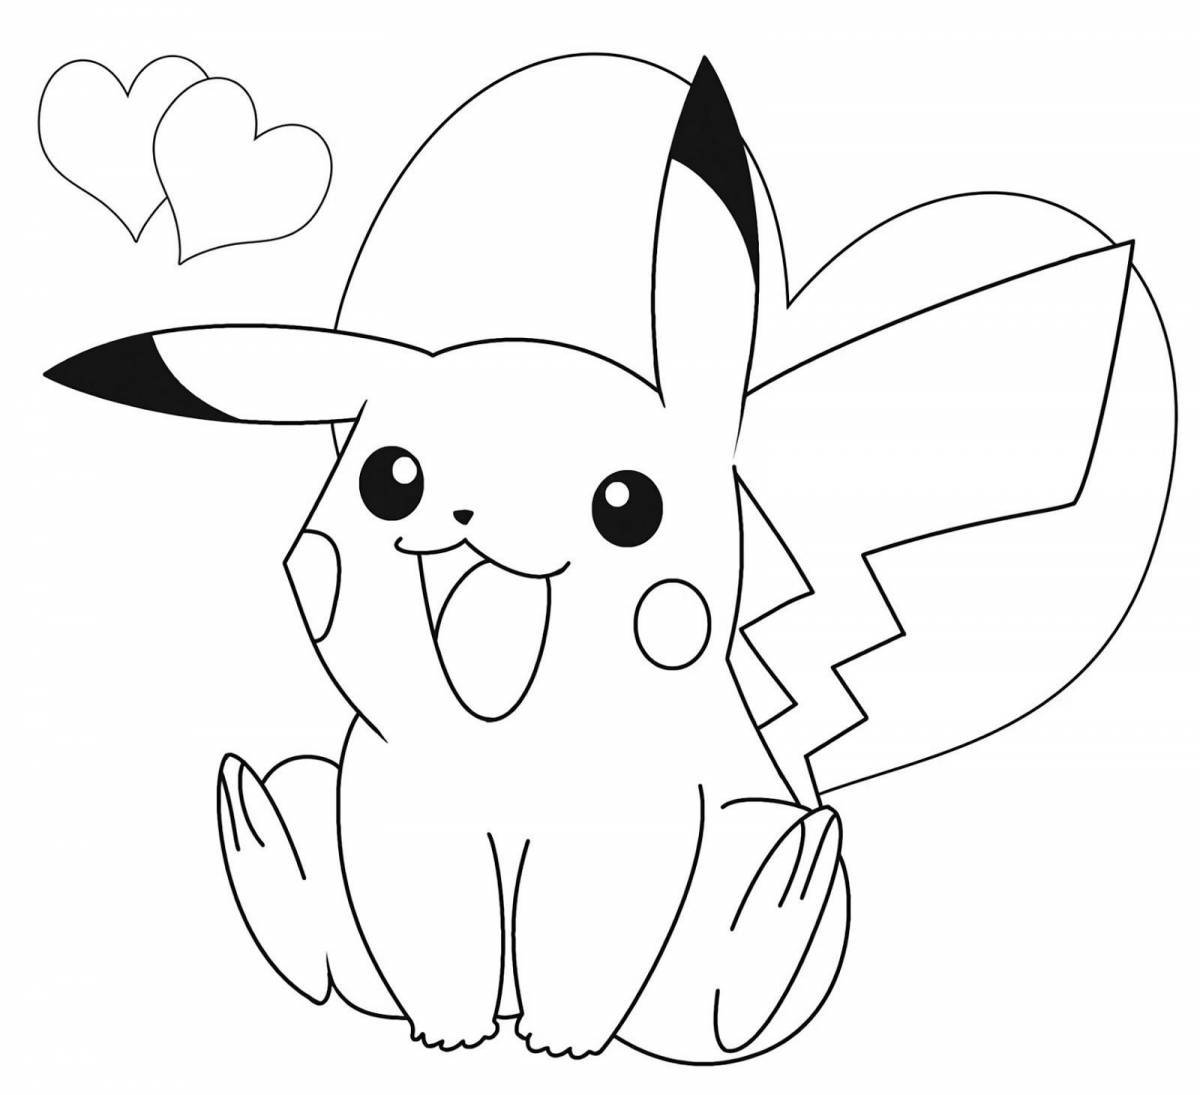 Pikachu pictures #3